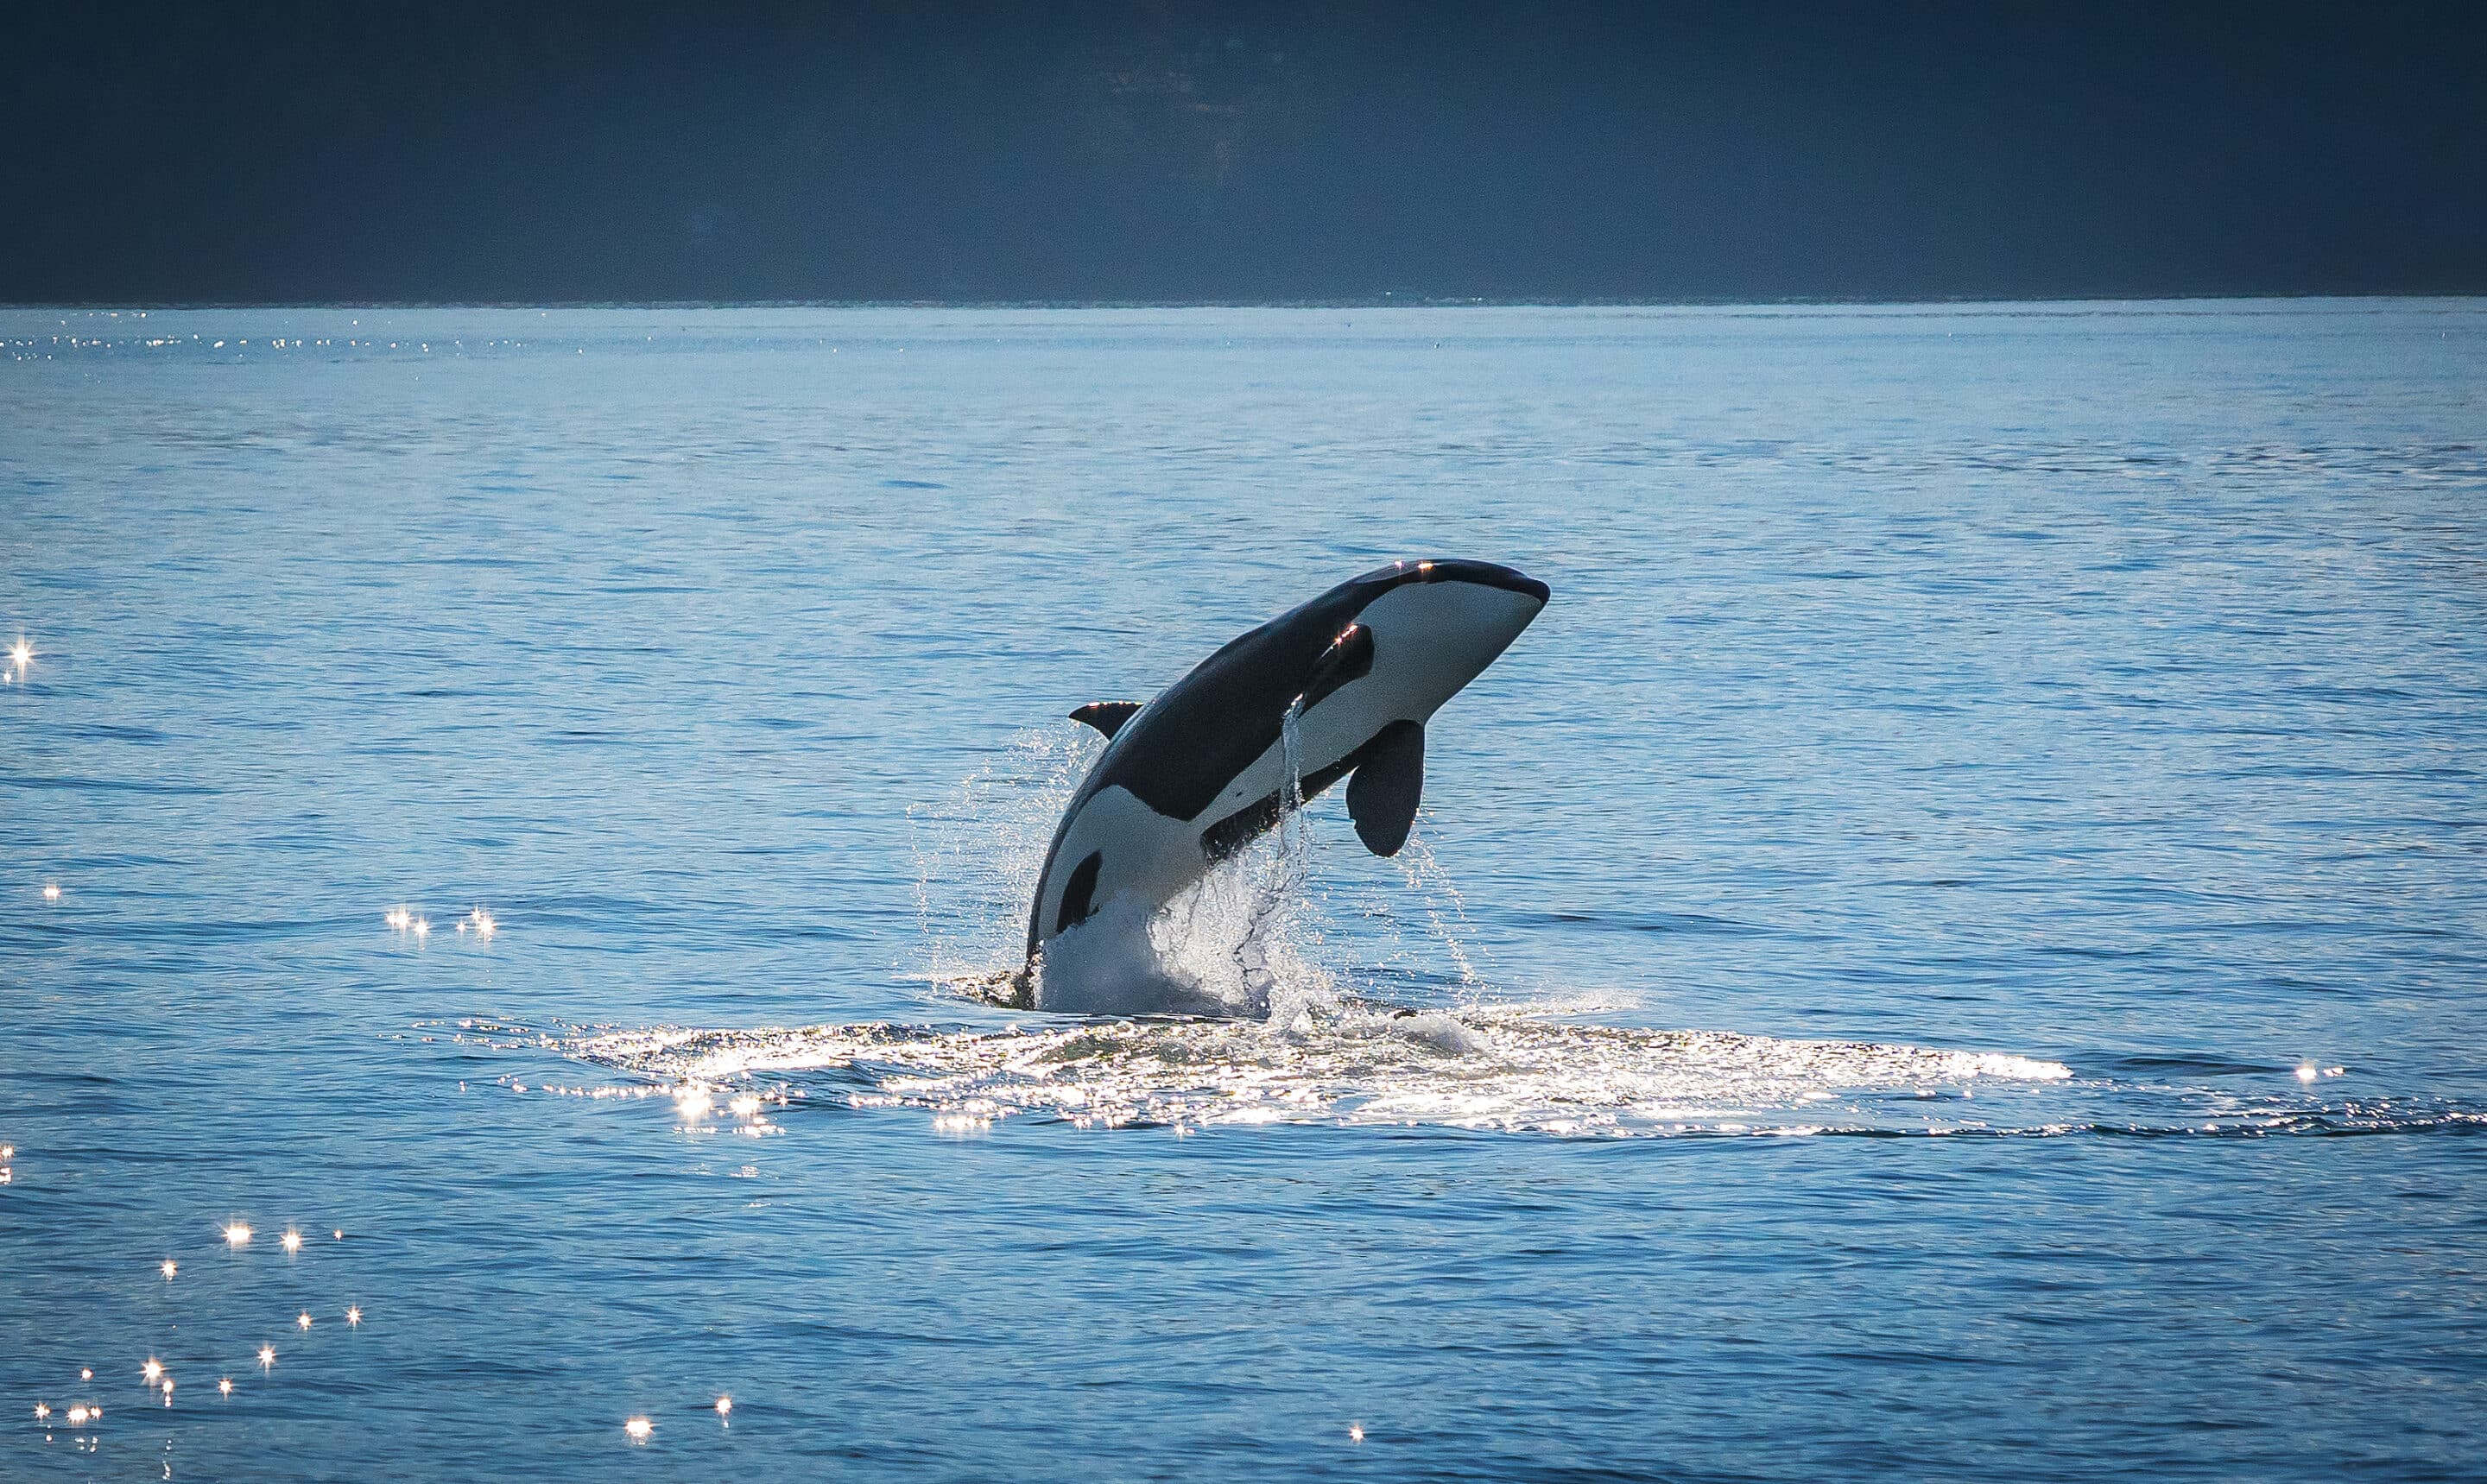 Killer whale breaching out of the waters near Victoria, BC.